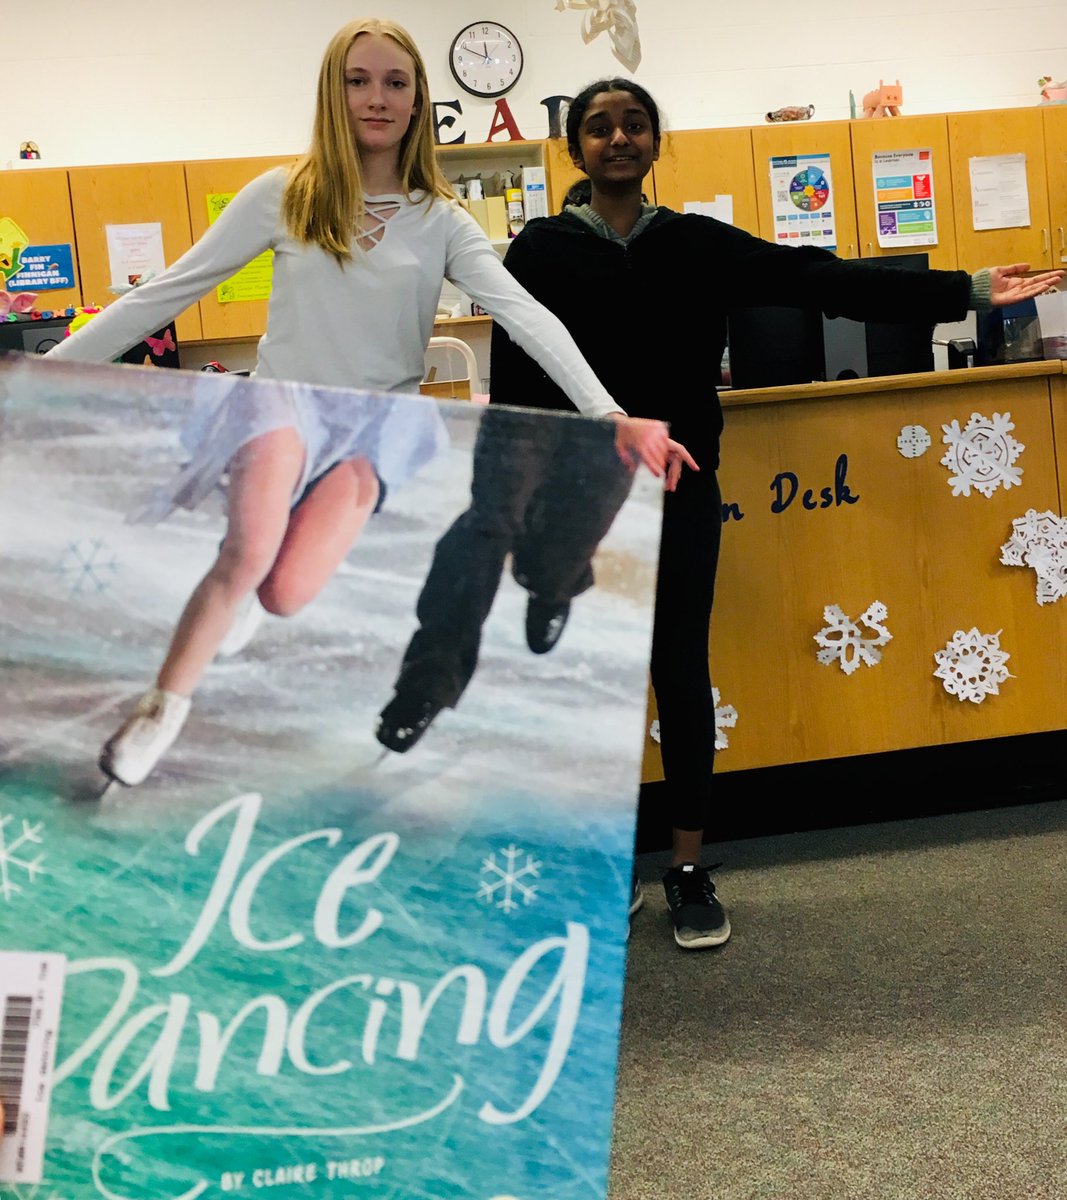 Happy #bookface Friday from the library! #ClaireThrop #IceDancing #ReadingIsAWinterSport @CapstonePub⁩